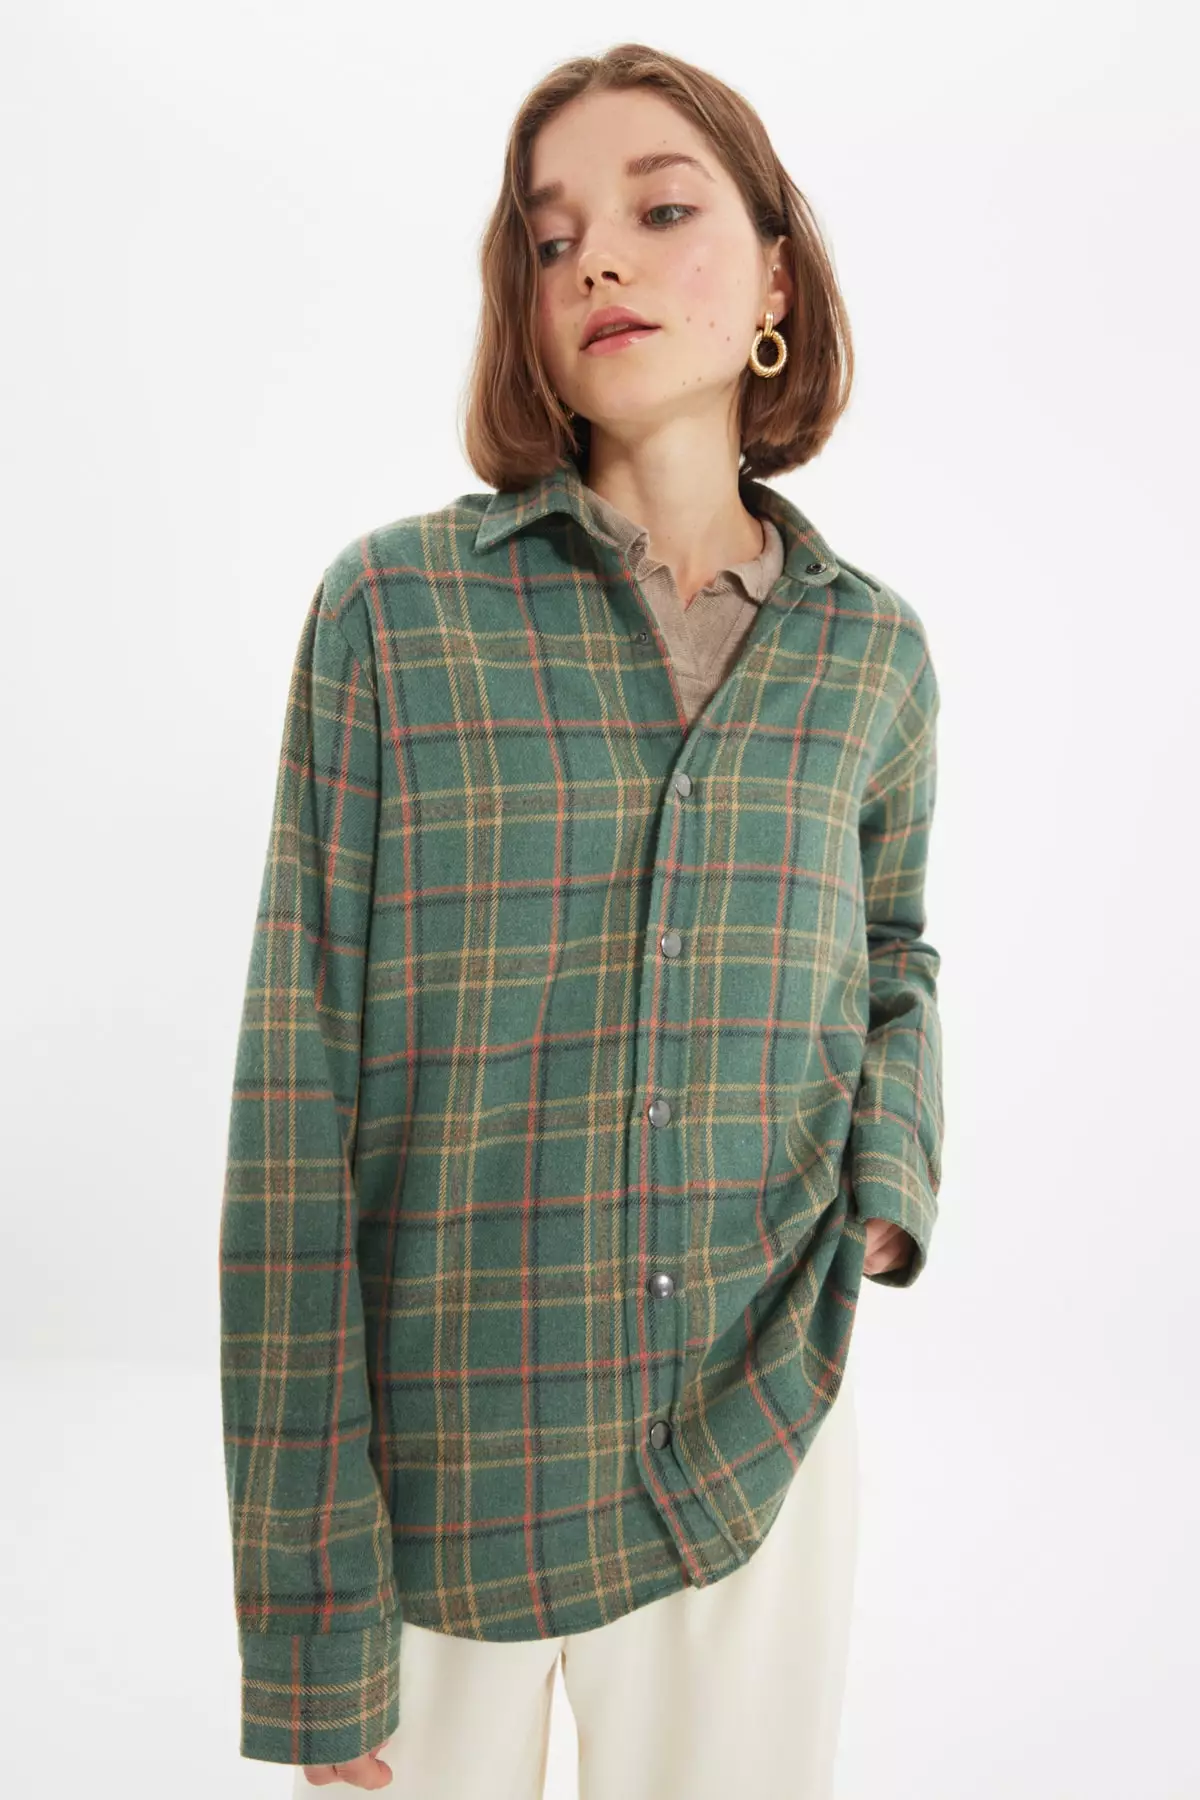 Green Unisex Oversize Plaid Lumberjack Shirt With Snap-In